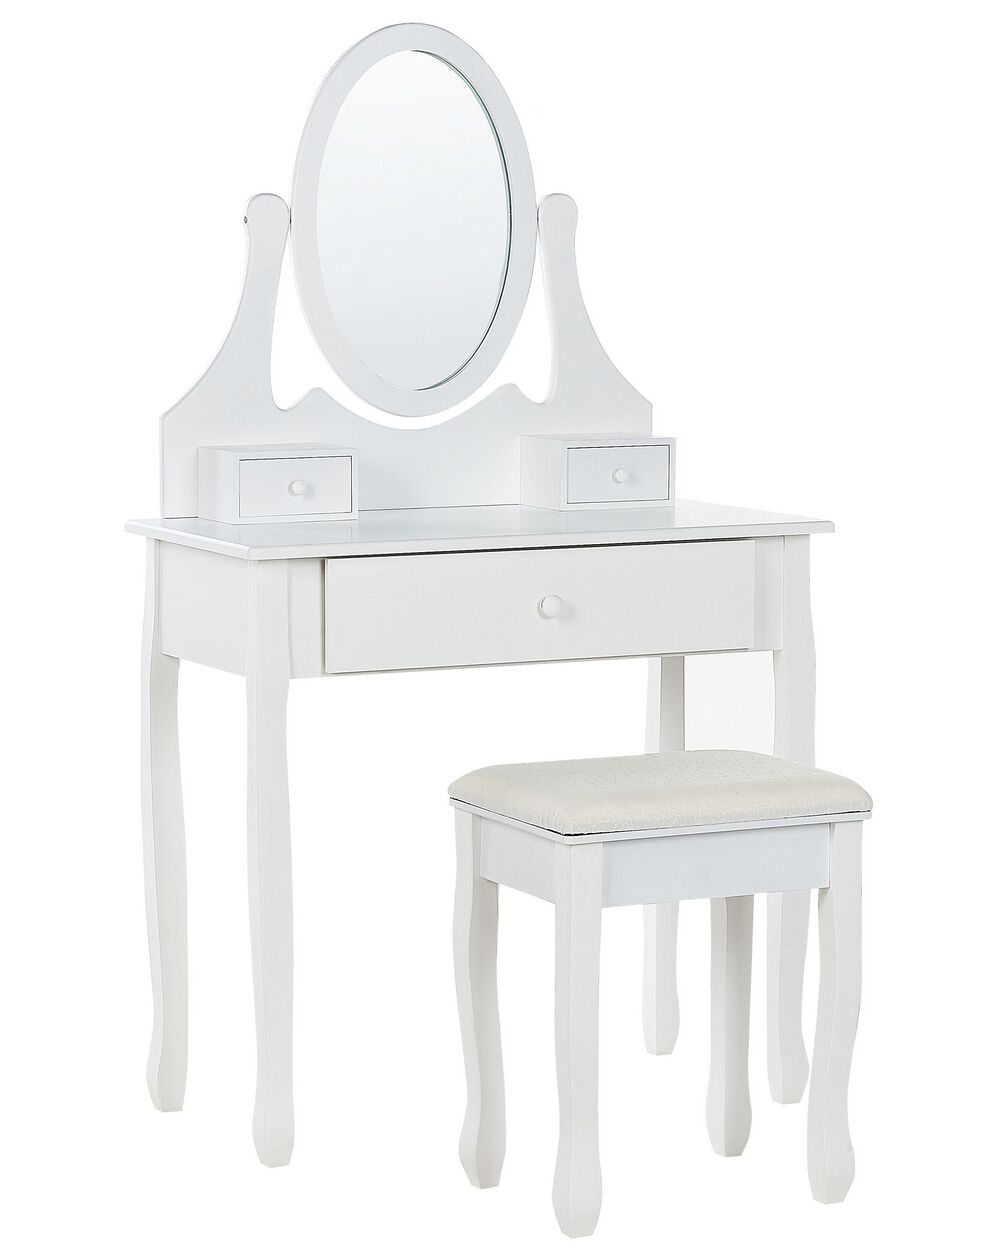 WIAWG 5-Drawers White Wood Makeup Vanity Set Dressing Desk W/ Stool, LED  Round Mirror and Storage Shelves 52x 31.5x 15.7 in. WFKF210095-03 - The  Home Depot